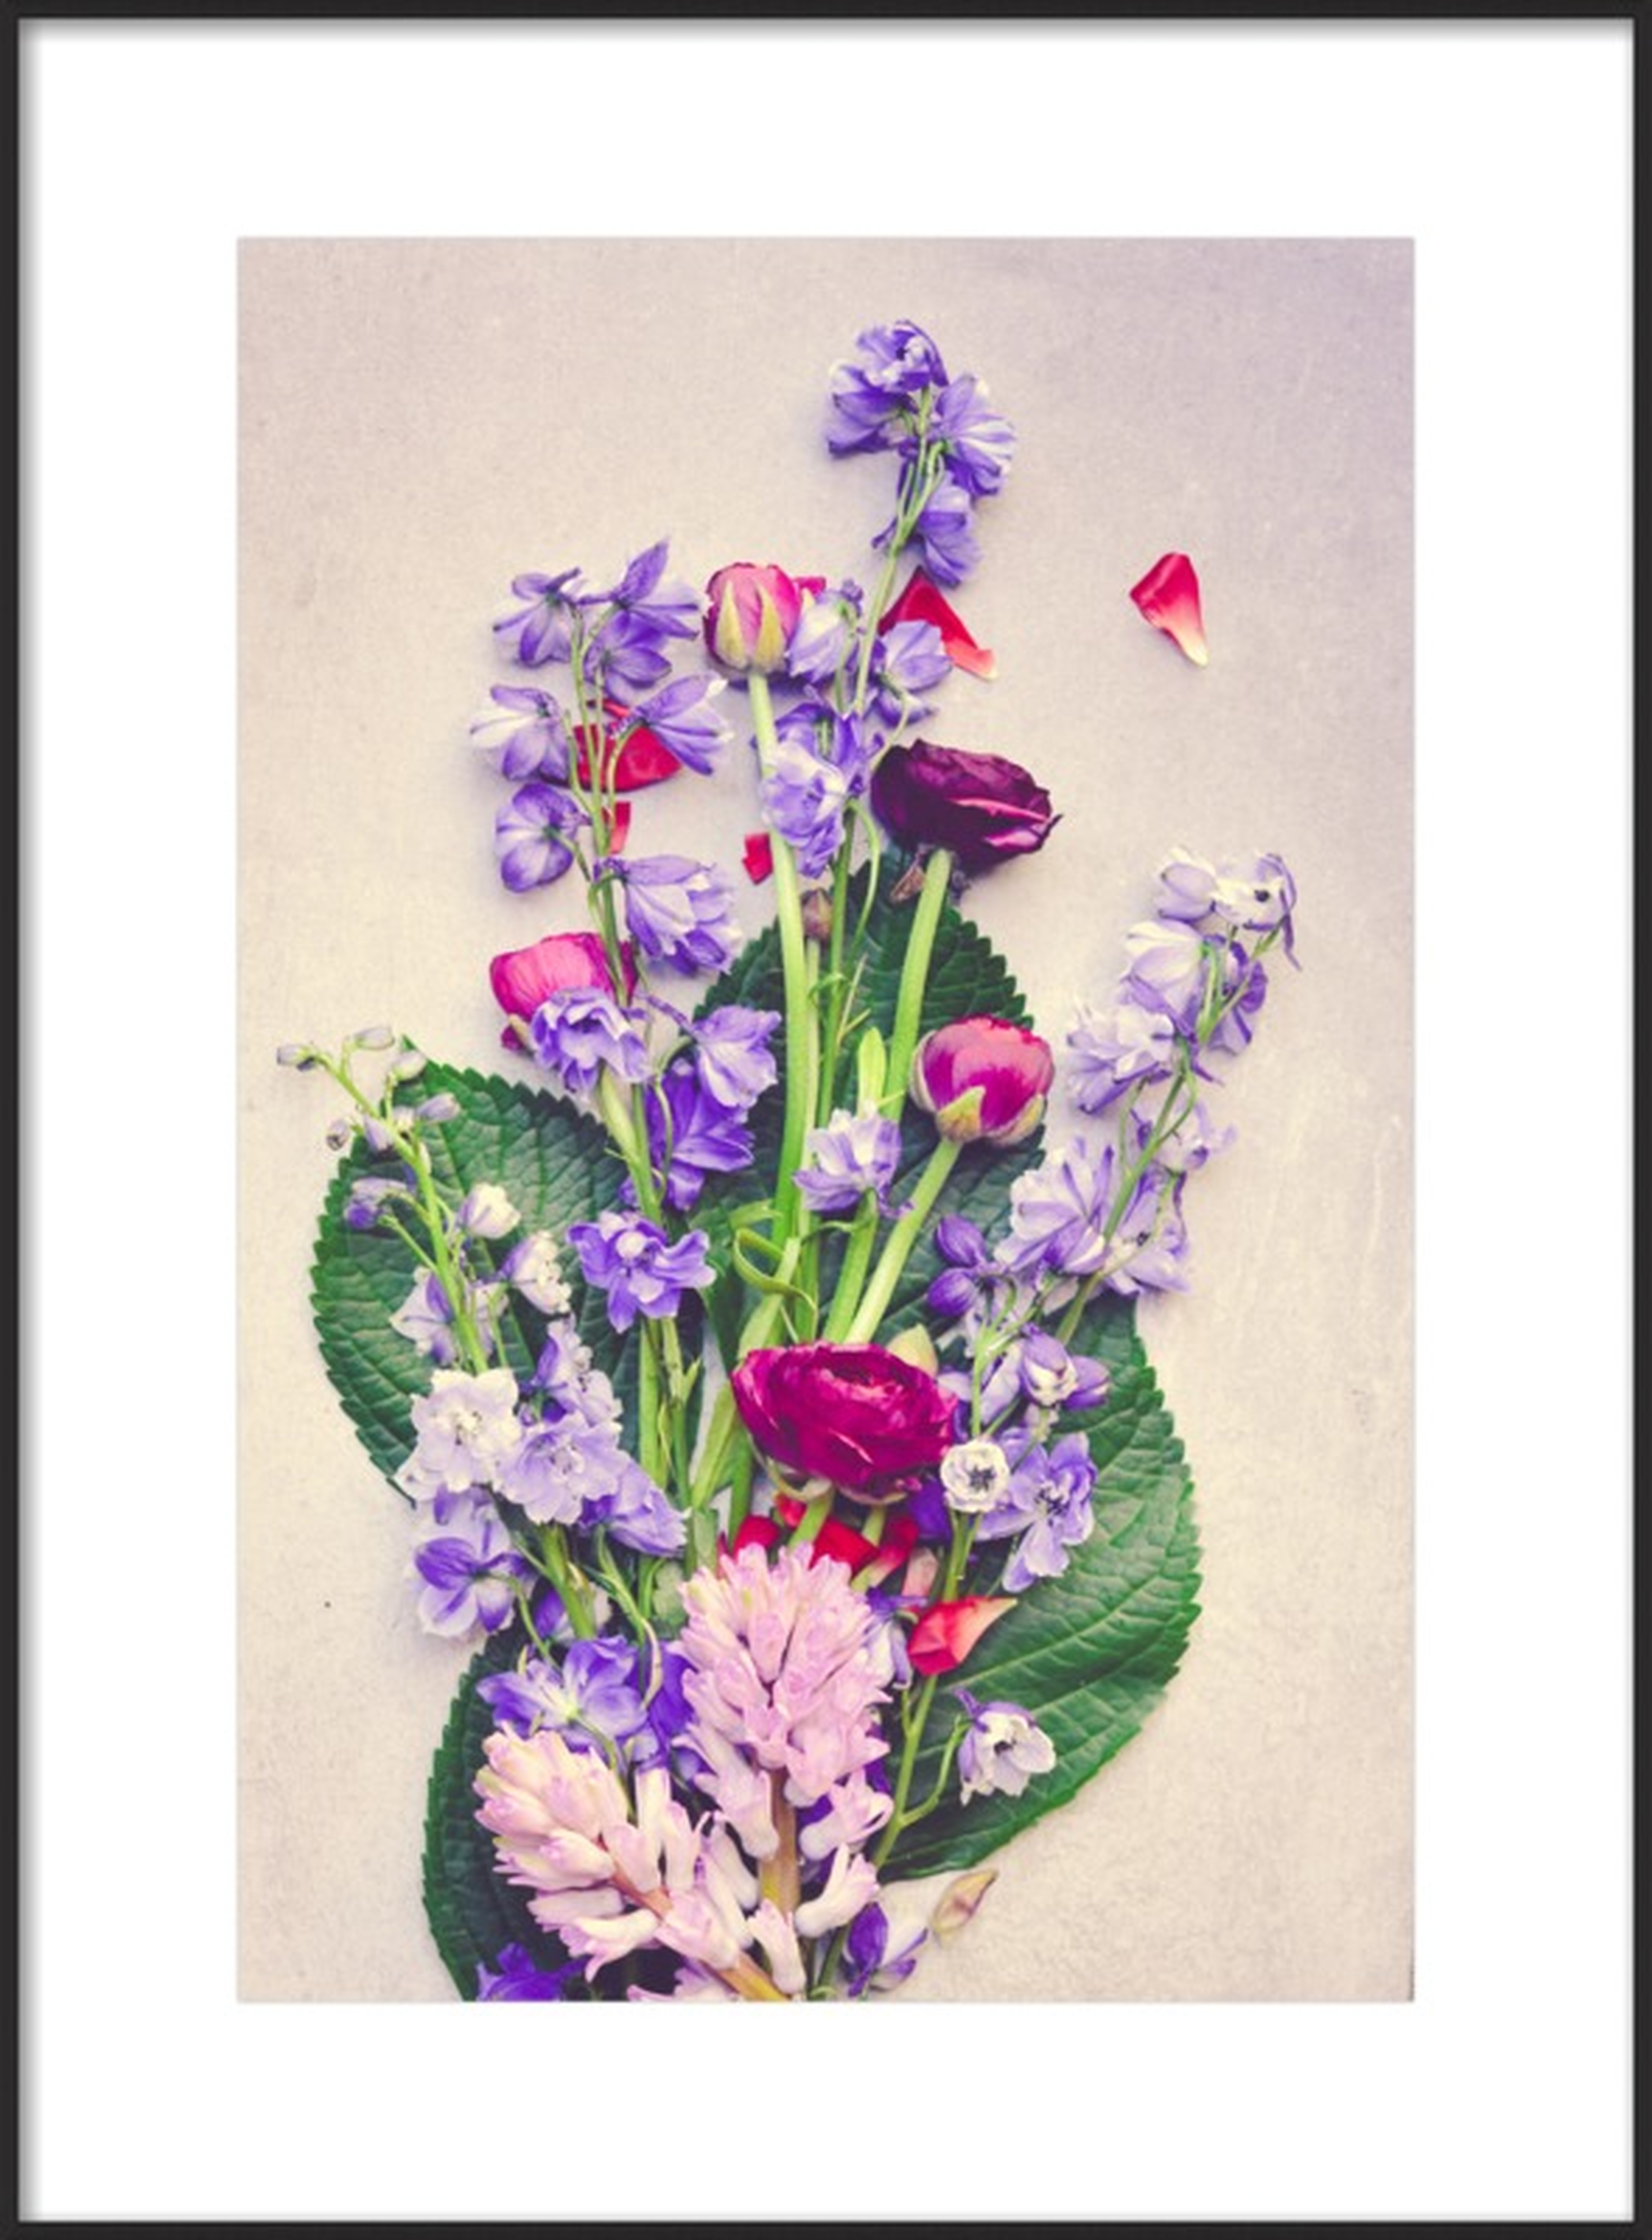 Beautiful Flowers by Olivia Joy StClaire for Artfully Walls - Artfully Walls